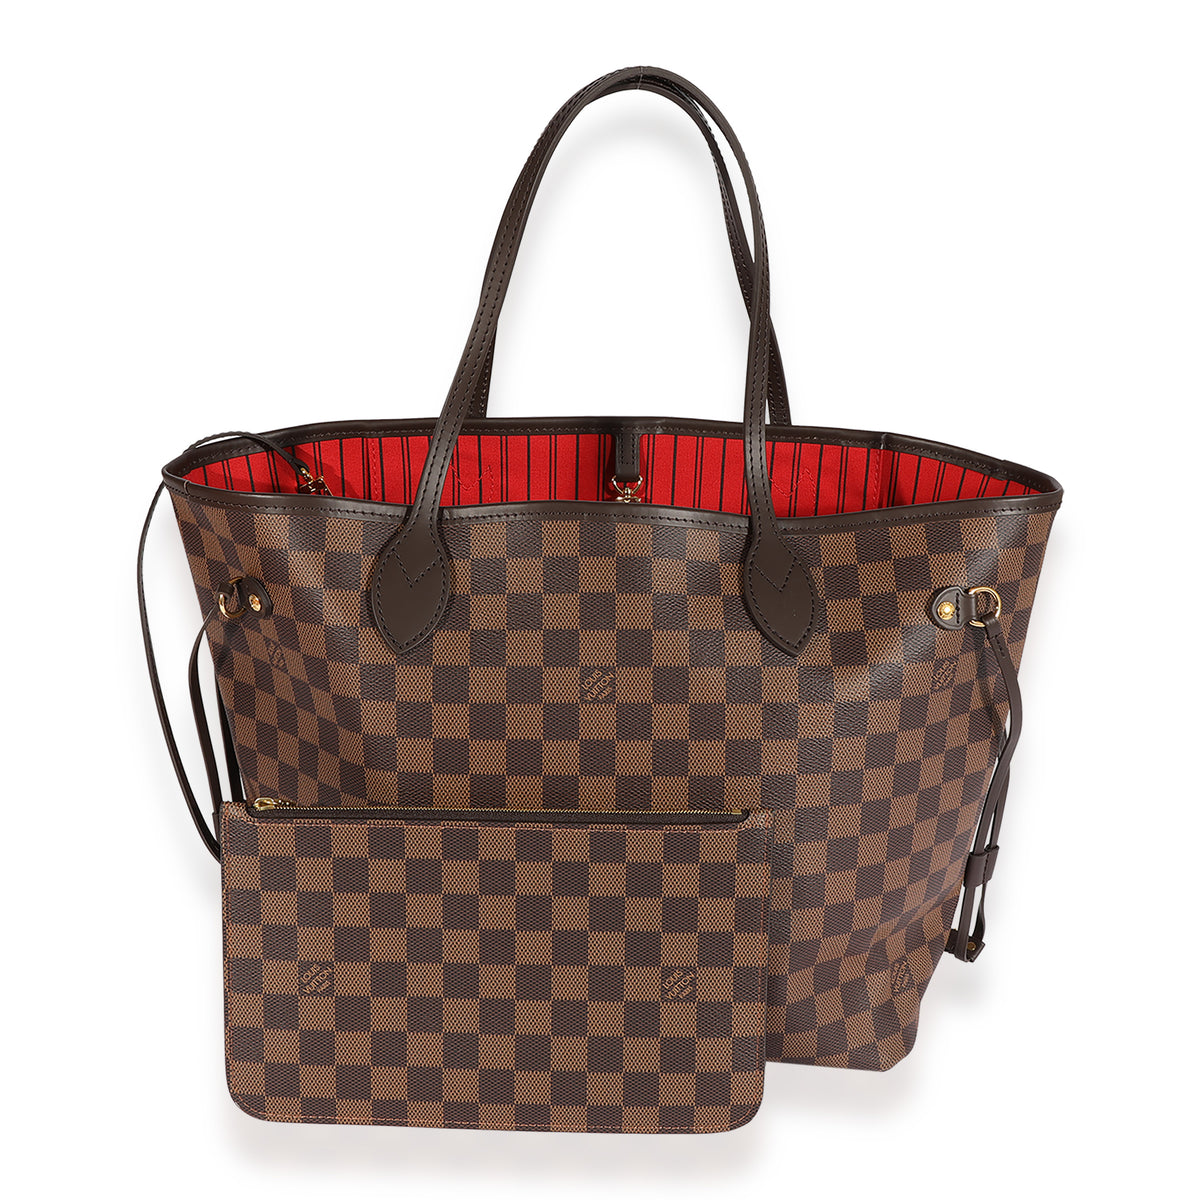 Louis Vuitton Neverfull Review: Is It Worth The Price? - A Byers Guide